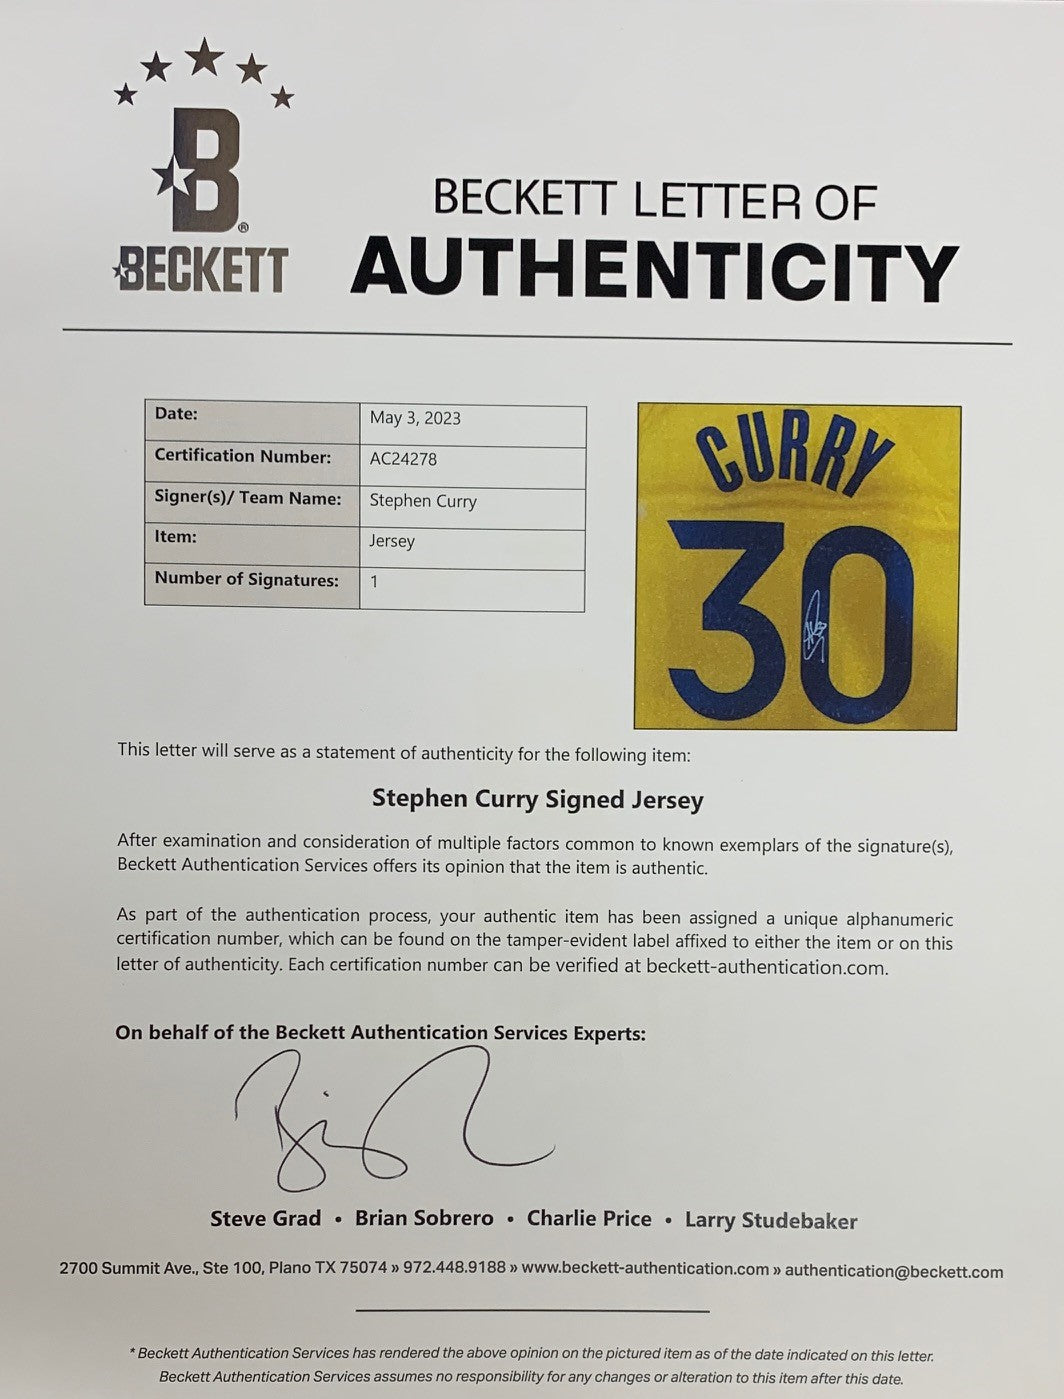 Stephen Curry Autographed Golden State THE CITY Swingman Signed Jersey